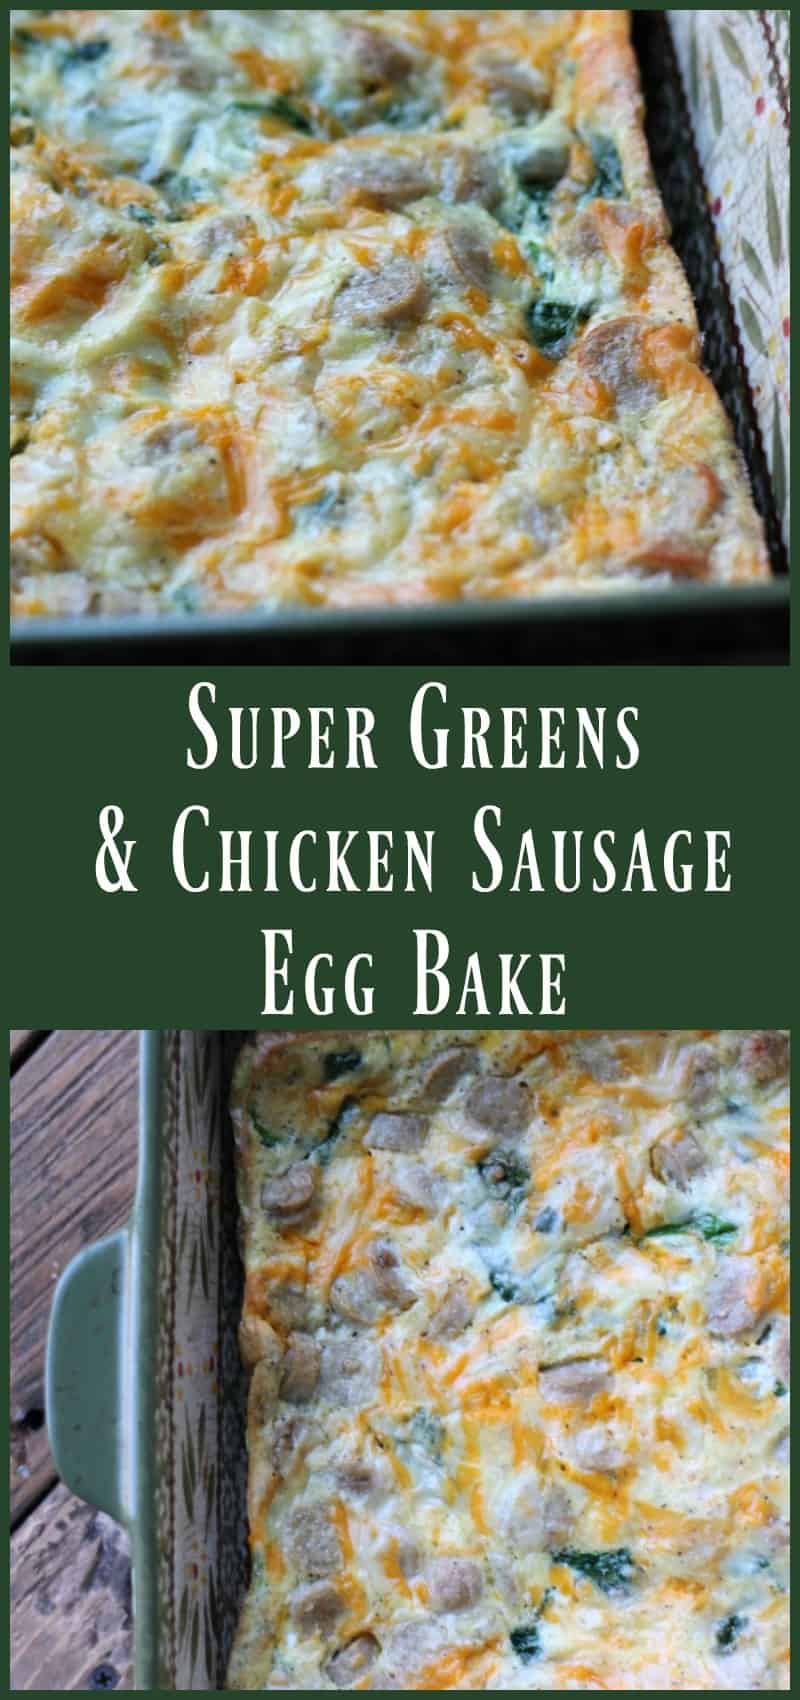 Super Greens and Chicken Sausage Egg Bake. Low carb make-ahead breakfast recipe